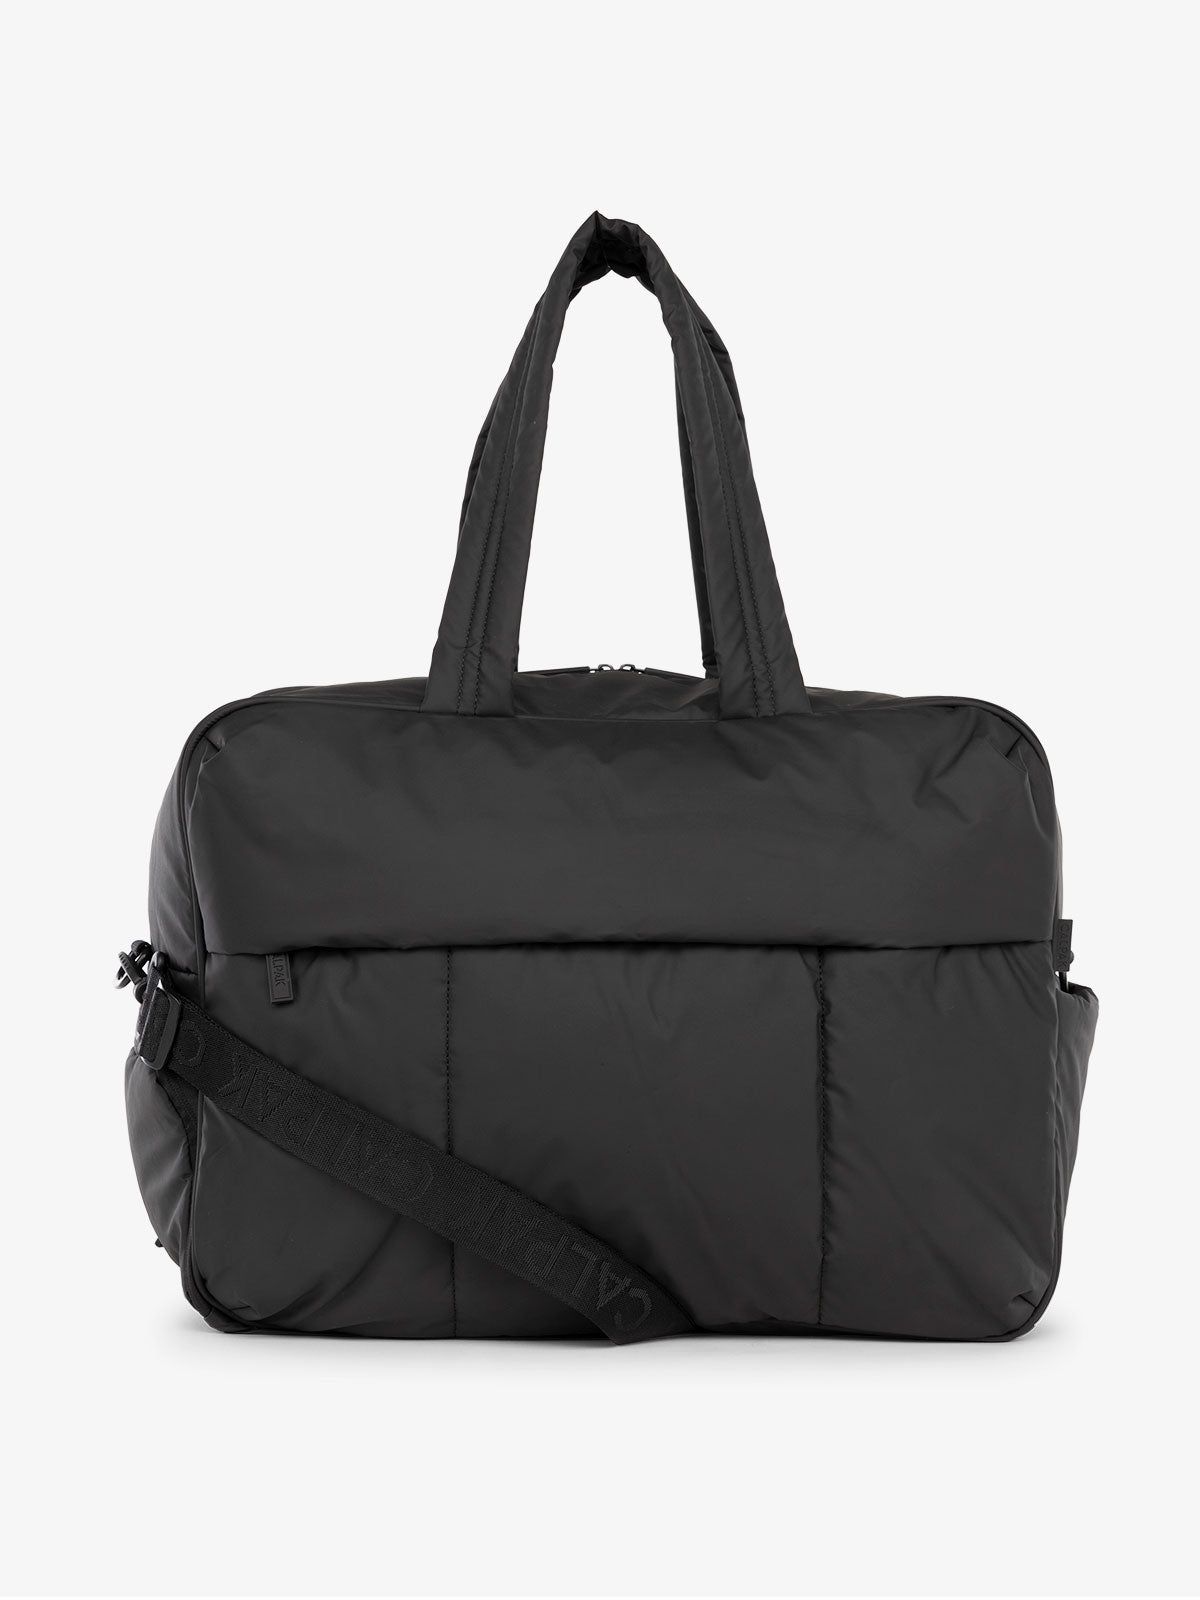 CALPAK Luka large duffle bag with detachable strap and zippered front pocket in black